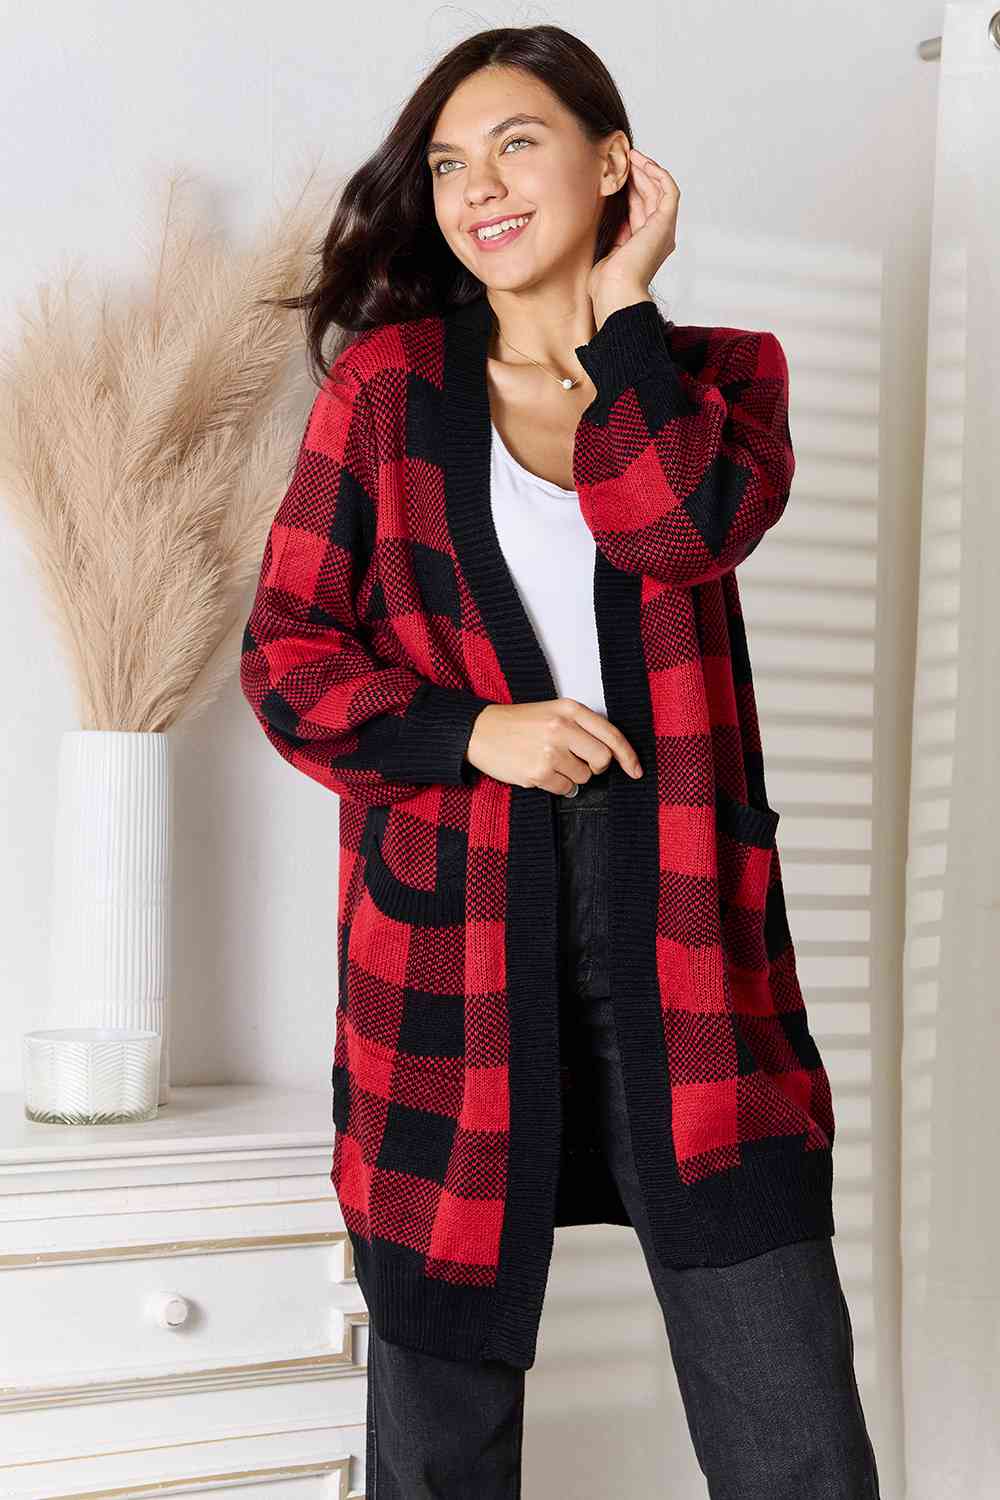 Heimish Full Size Buffalo Check Plaid Open Front Cardigan with Pockets